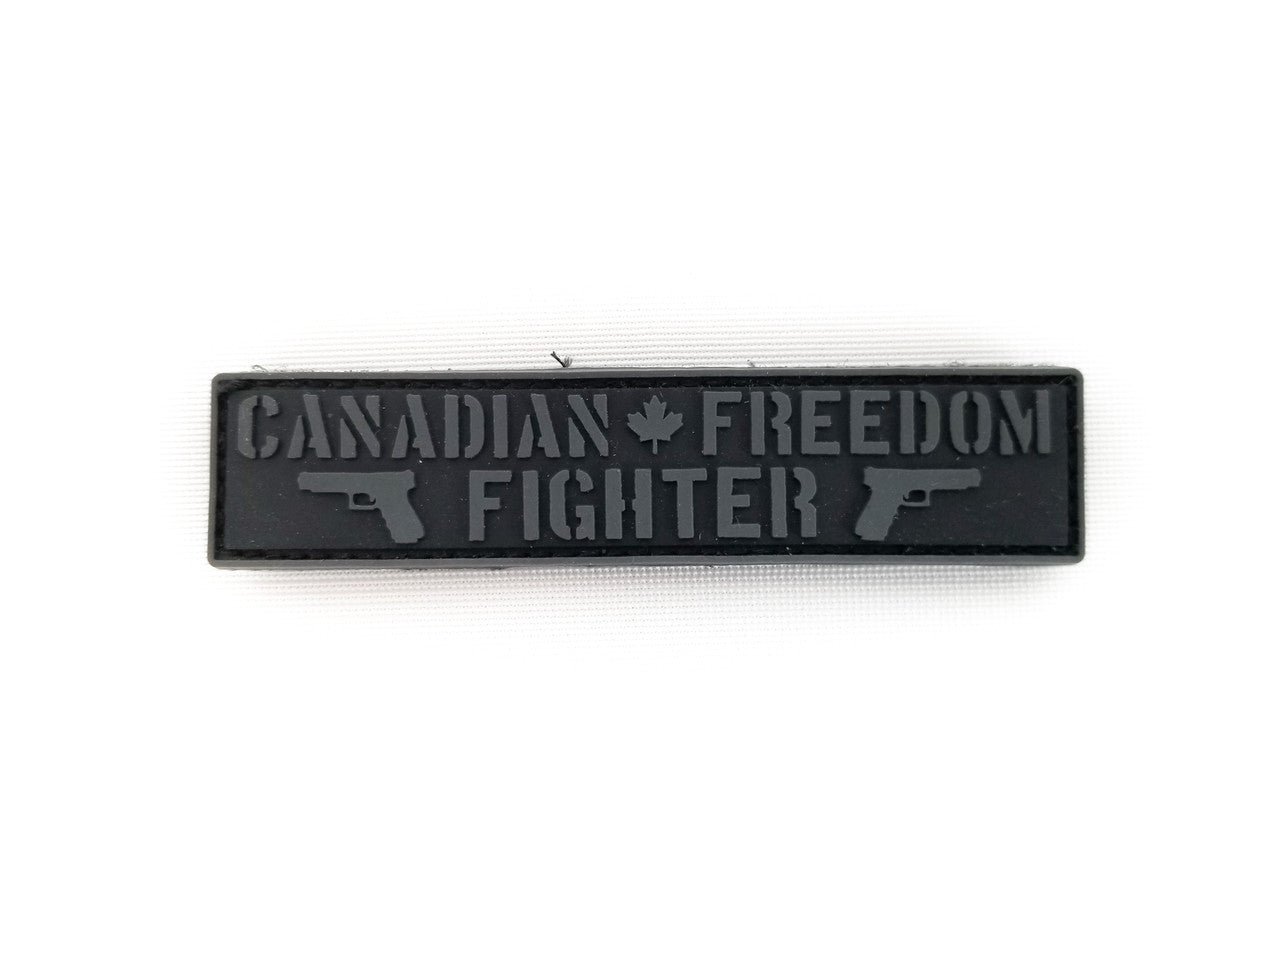 Canadian Freedom Fighter